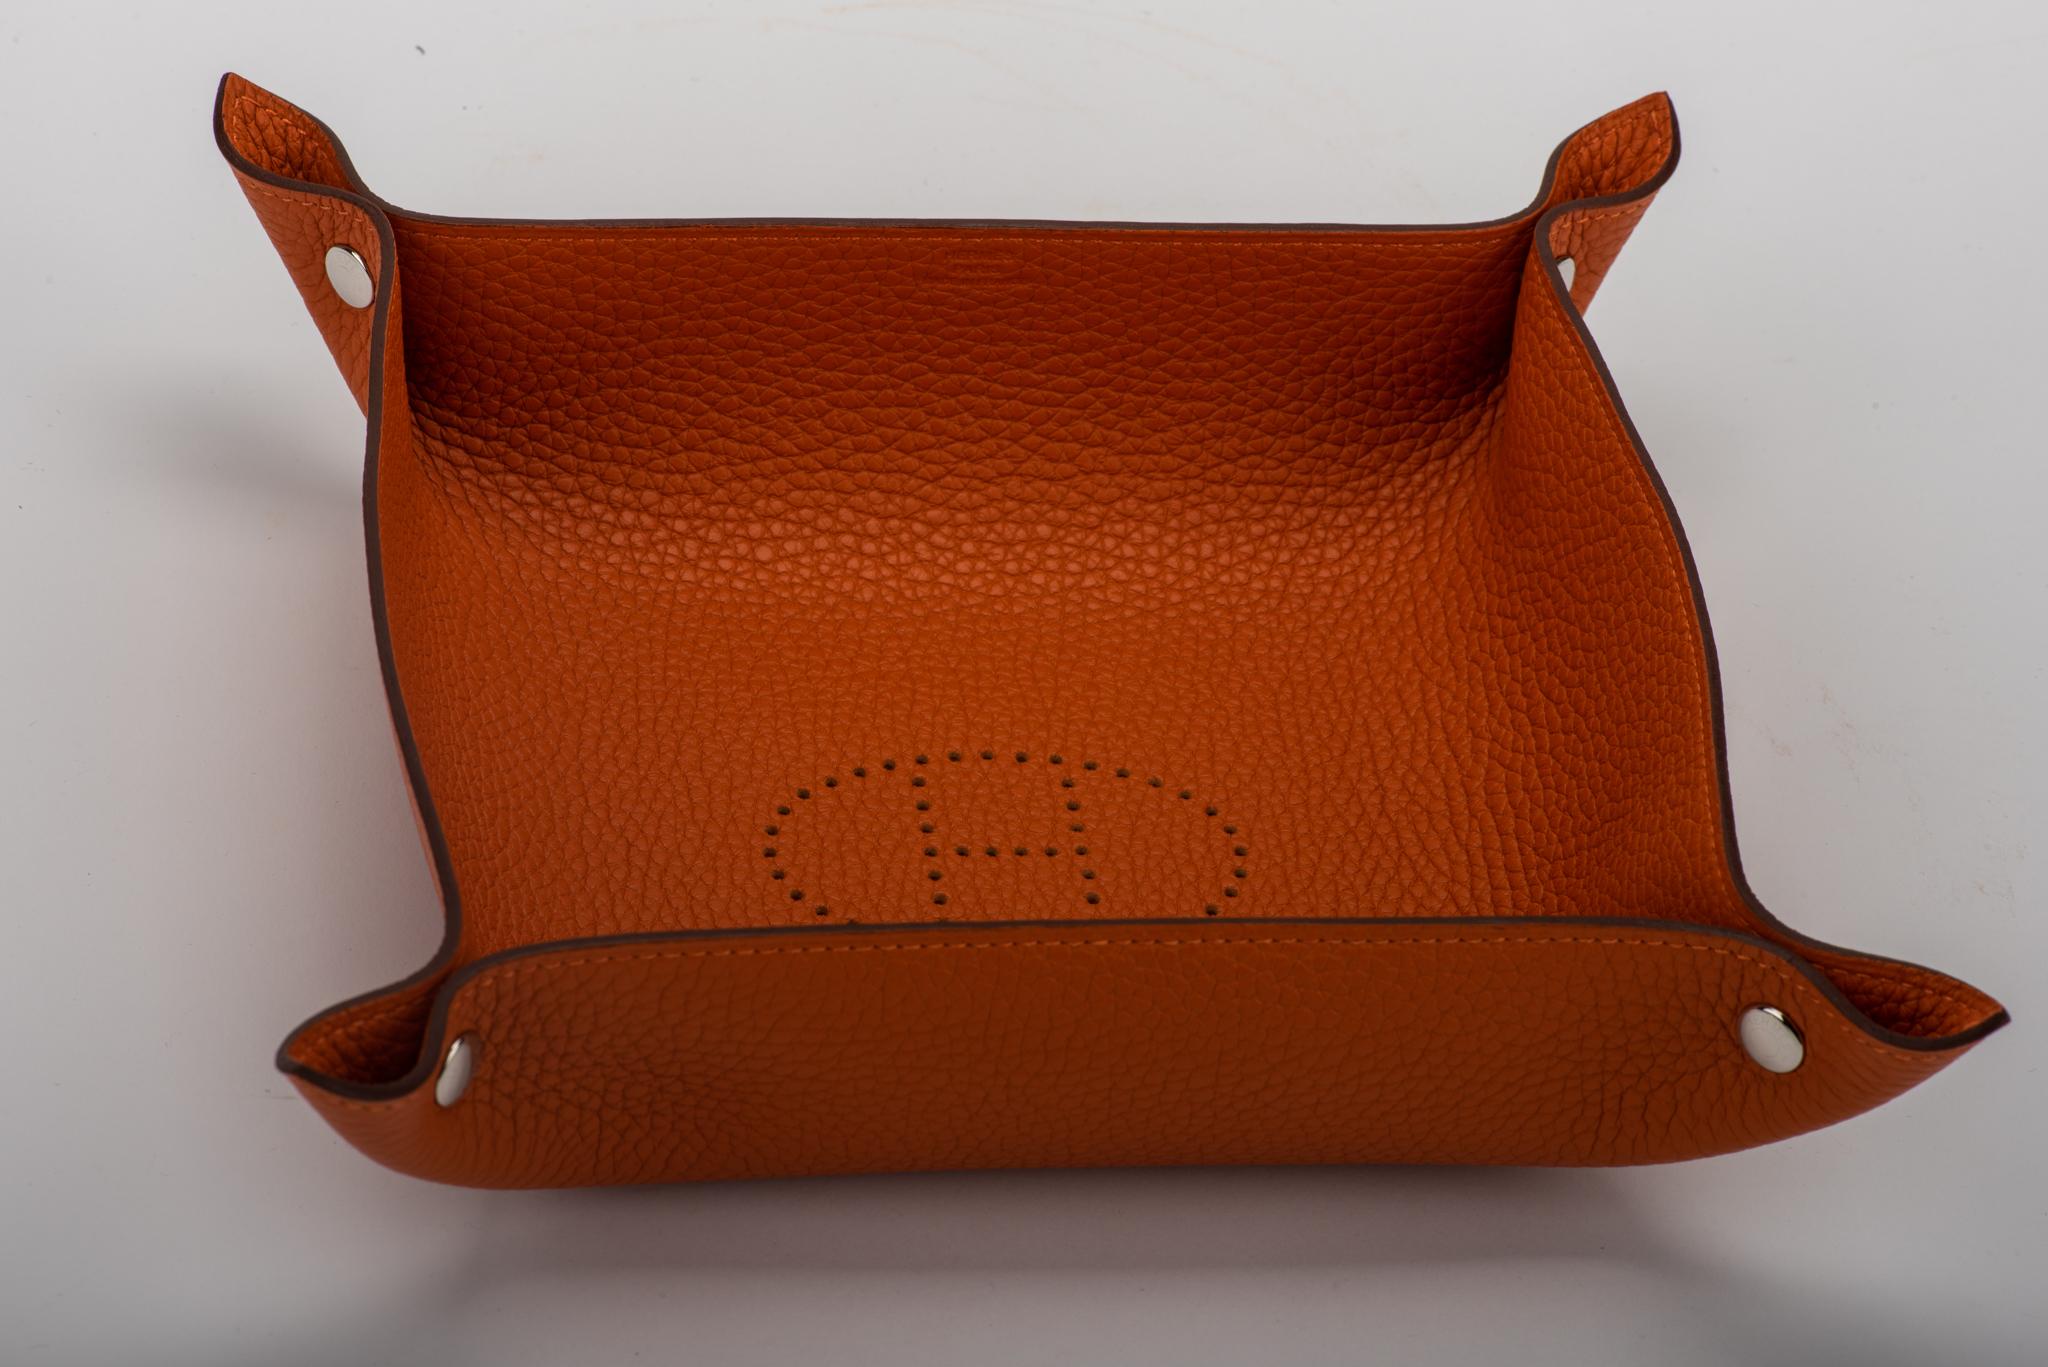 Hermès orange taurillon clemence leather and palladium hardware change tray. Date stamp C for 2018. Brand new in box.